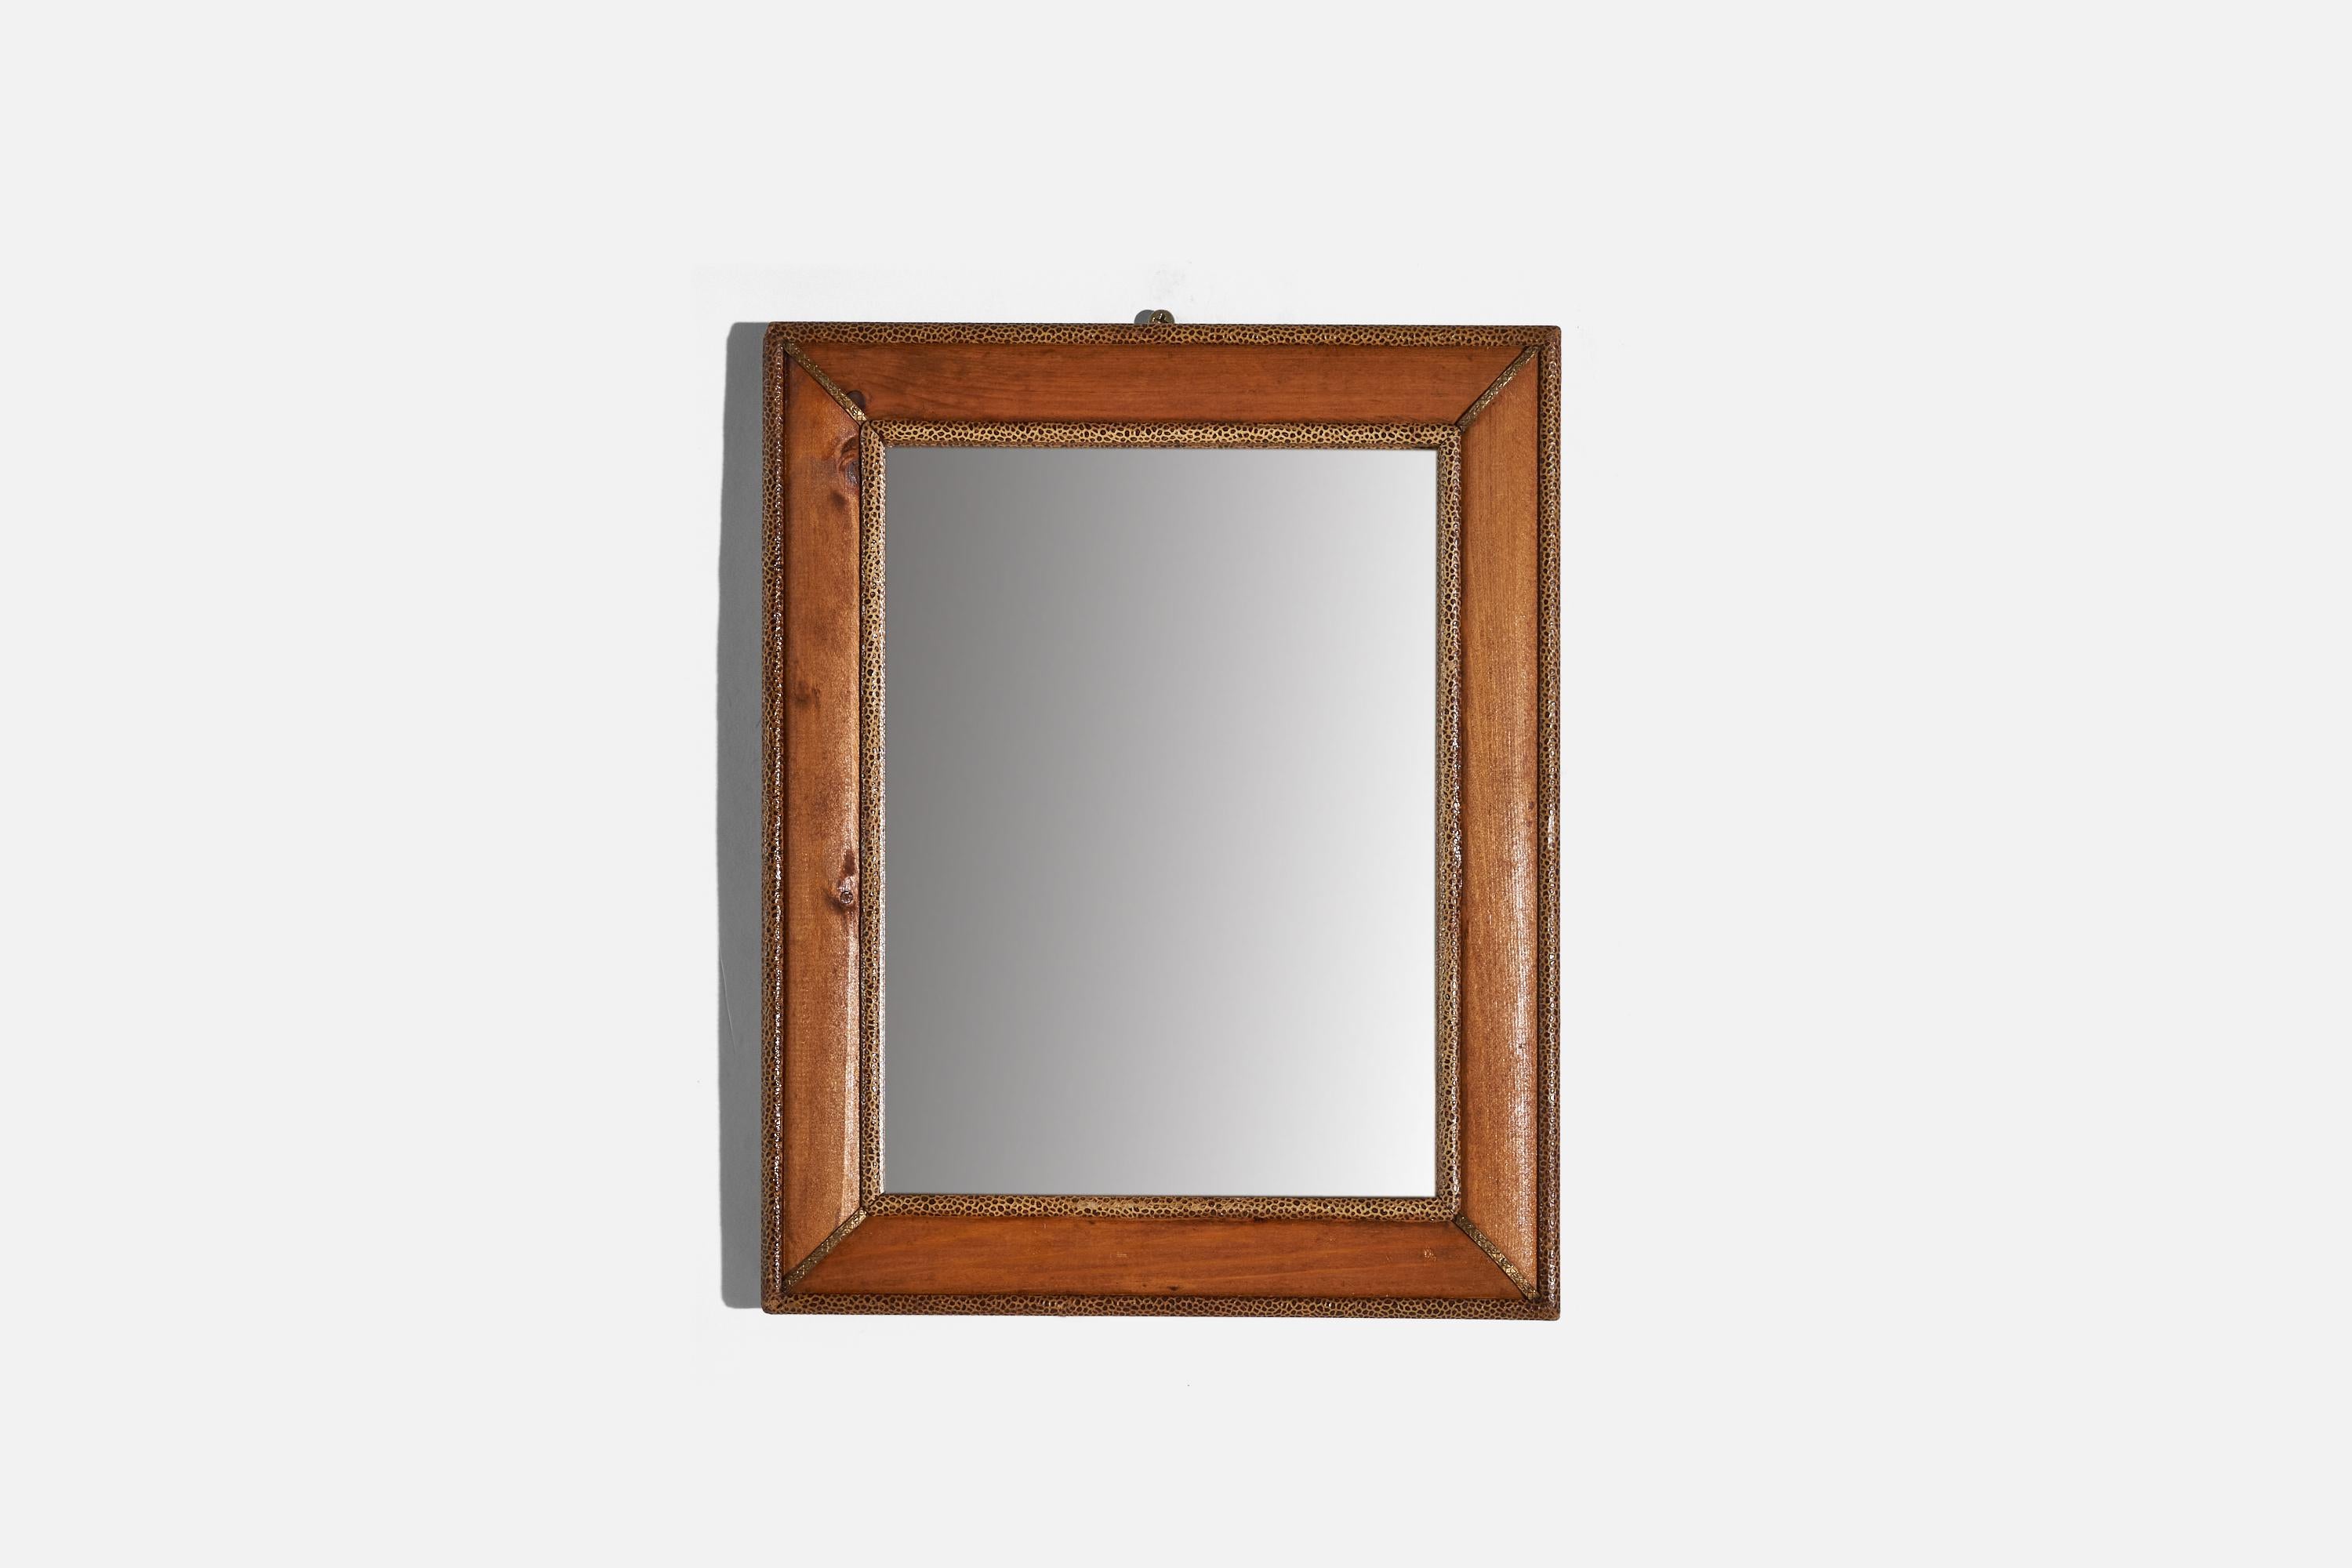 A wooden wall mirror designed and produced in Italy, c. 1950-1960s.
 